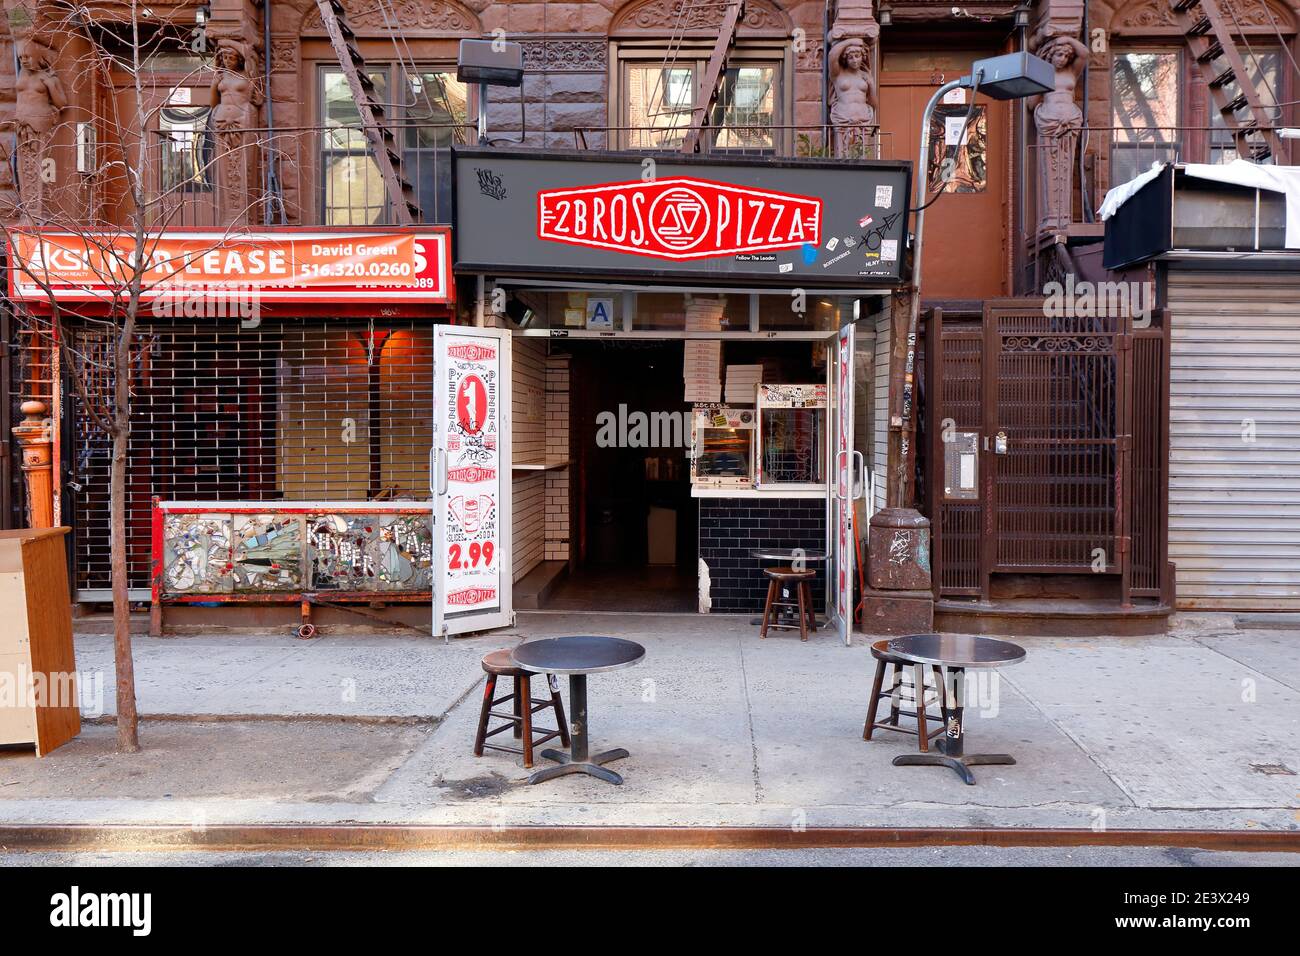 2 Bros Pizza, 32 St Marks Pl, New York, NY. exterior storefront of a dollar pizza store chain in Manhattan's East Village neighborhood. Stock Photo